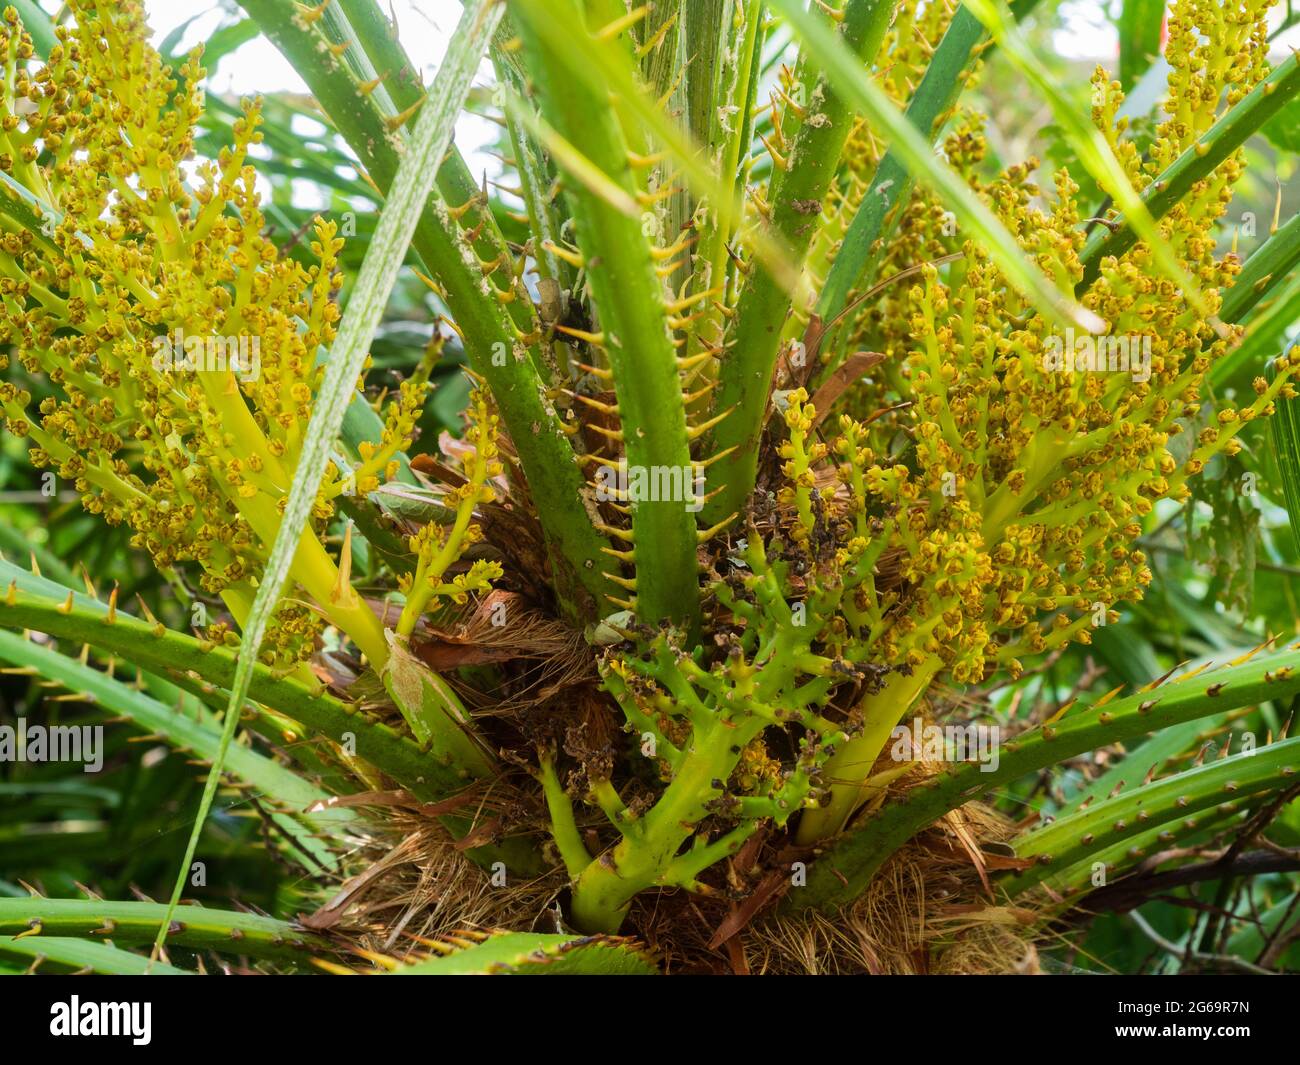 Flowering stalks of the half hardy European fan palm emerge among the spiny frond stalks in early summer Stock Photo